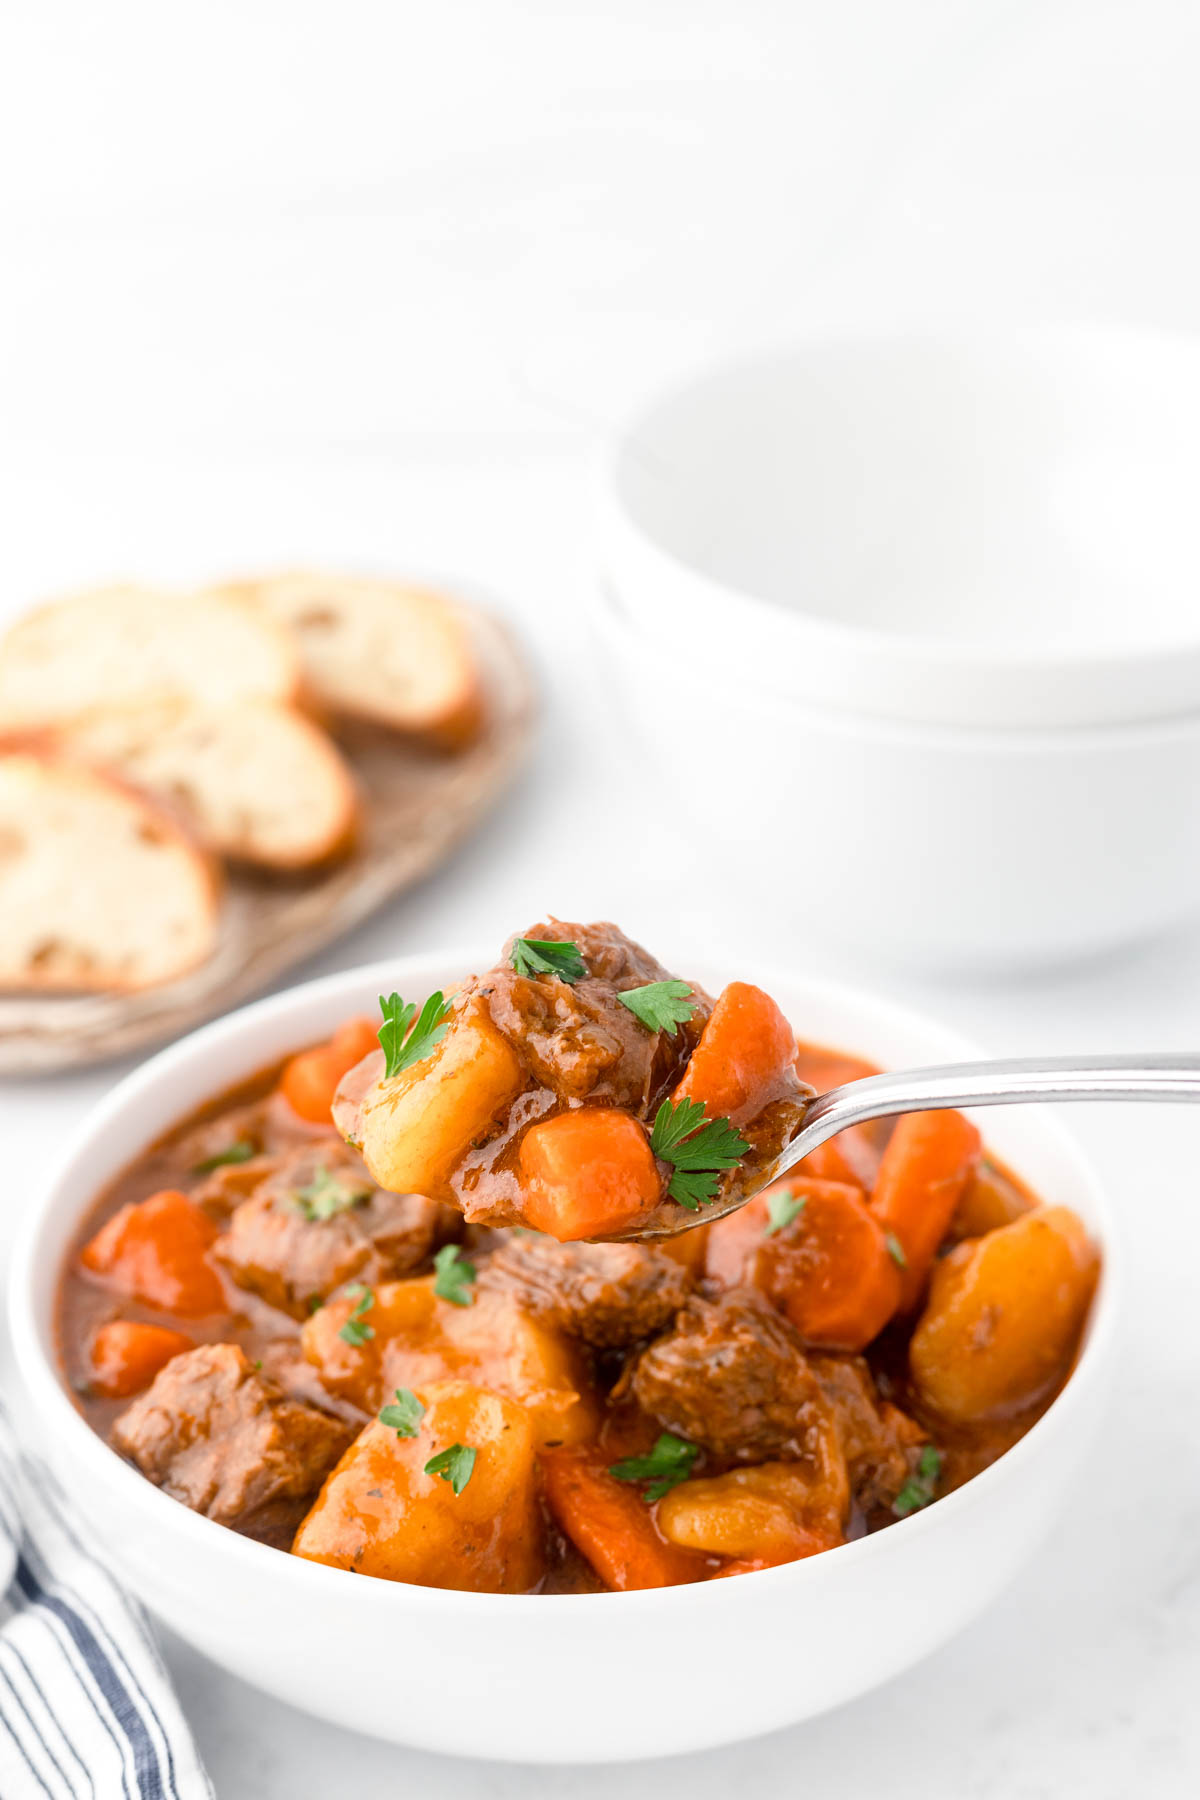 A bowl filled with beef stew is in the foreground, with a spoonful of stew raised closer to the camera. 